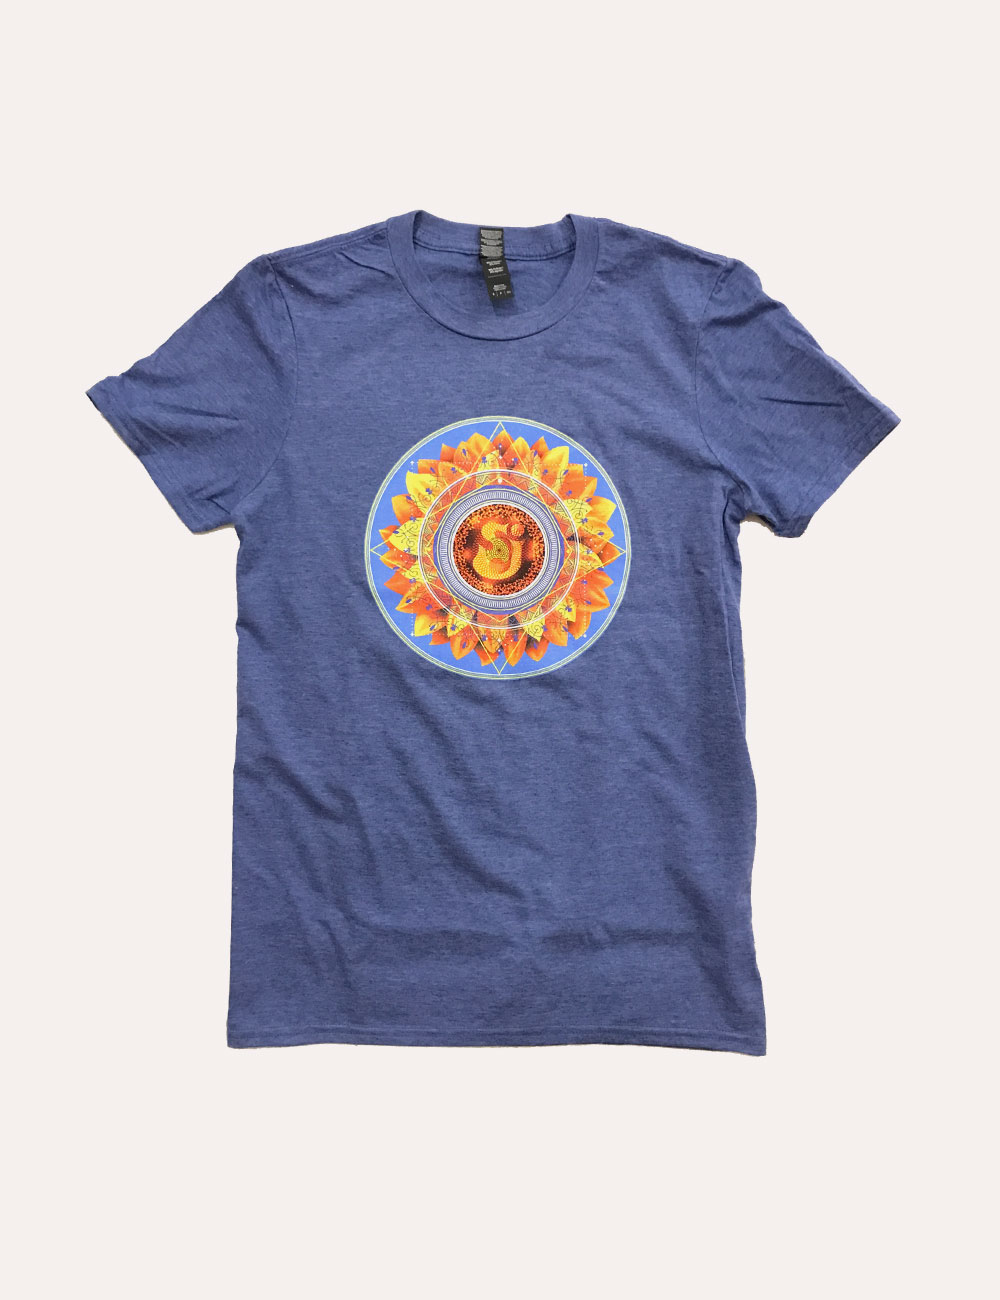 The String Cheese Incident - Merch - Tshirt - Medallion Tee